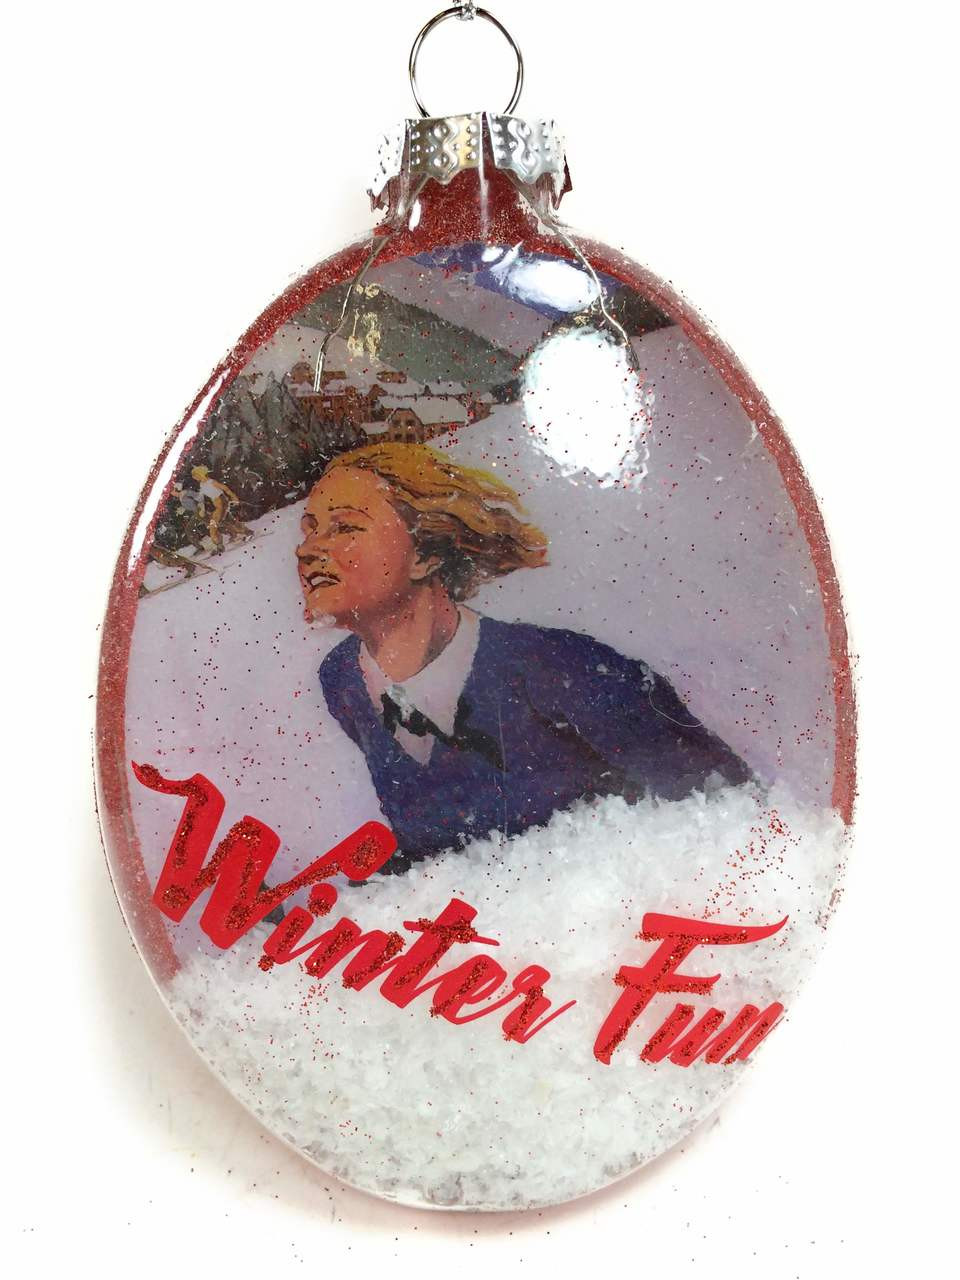 Details about   In The Powder Vintage Style Ski Oval Disc Christmas Ornament 4.75" 